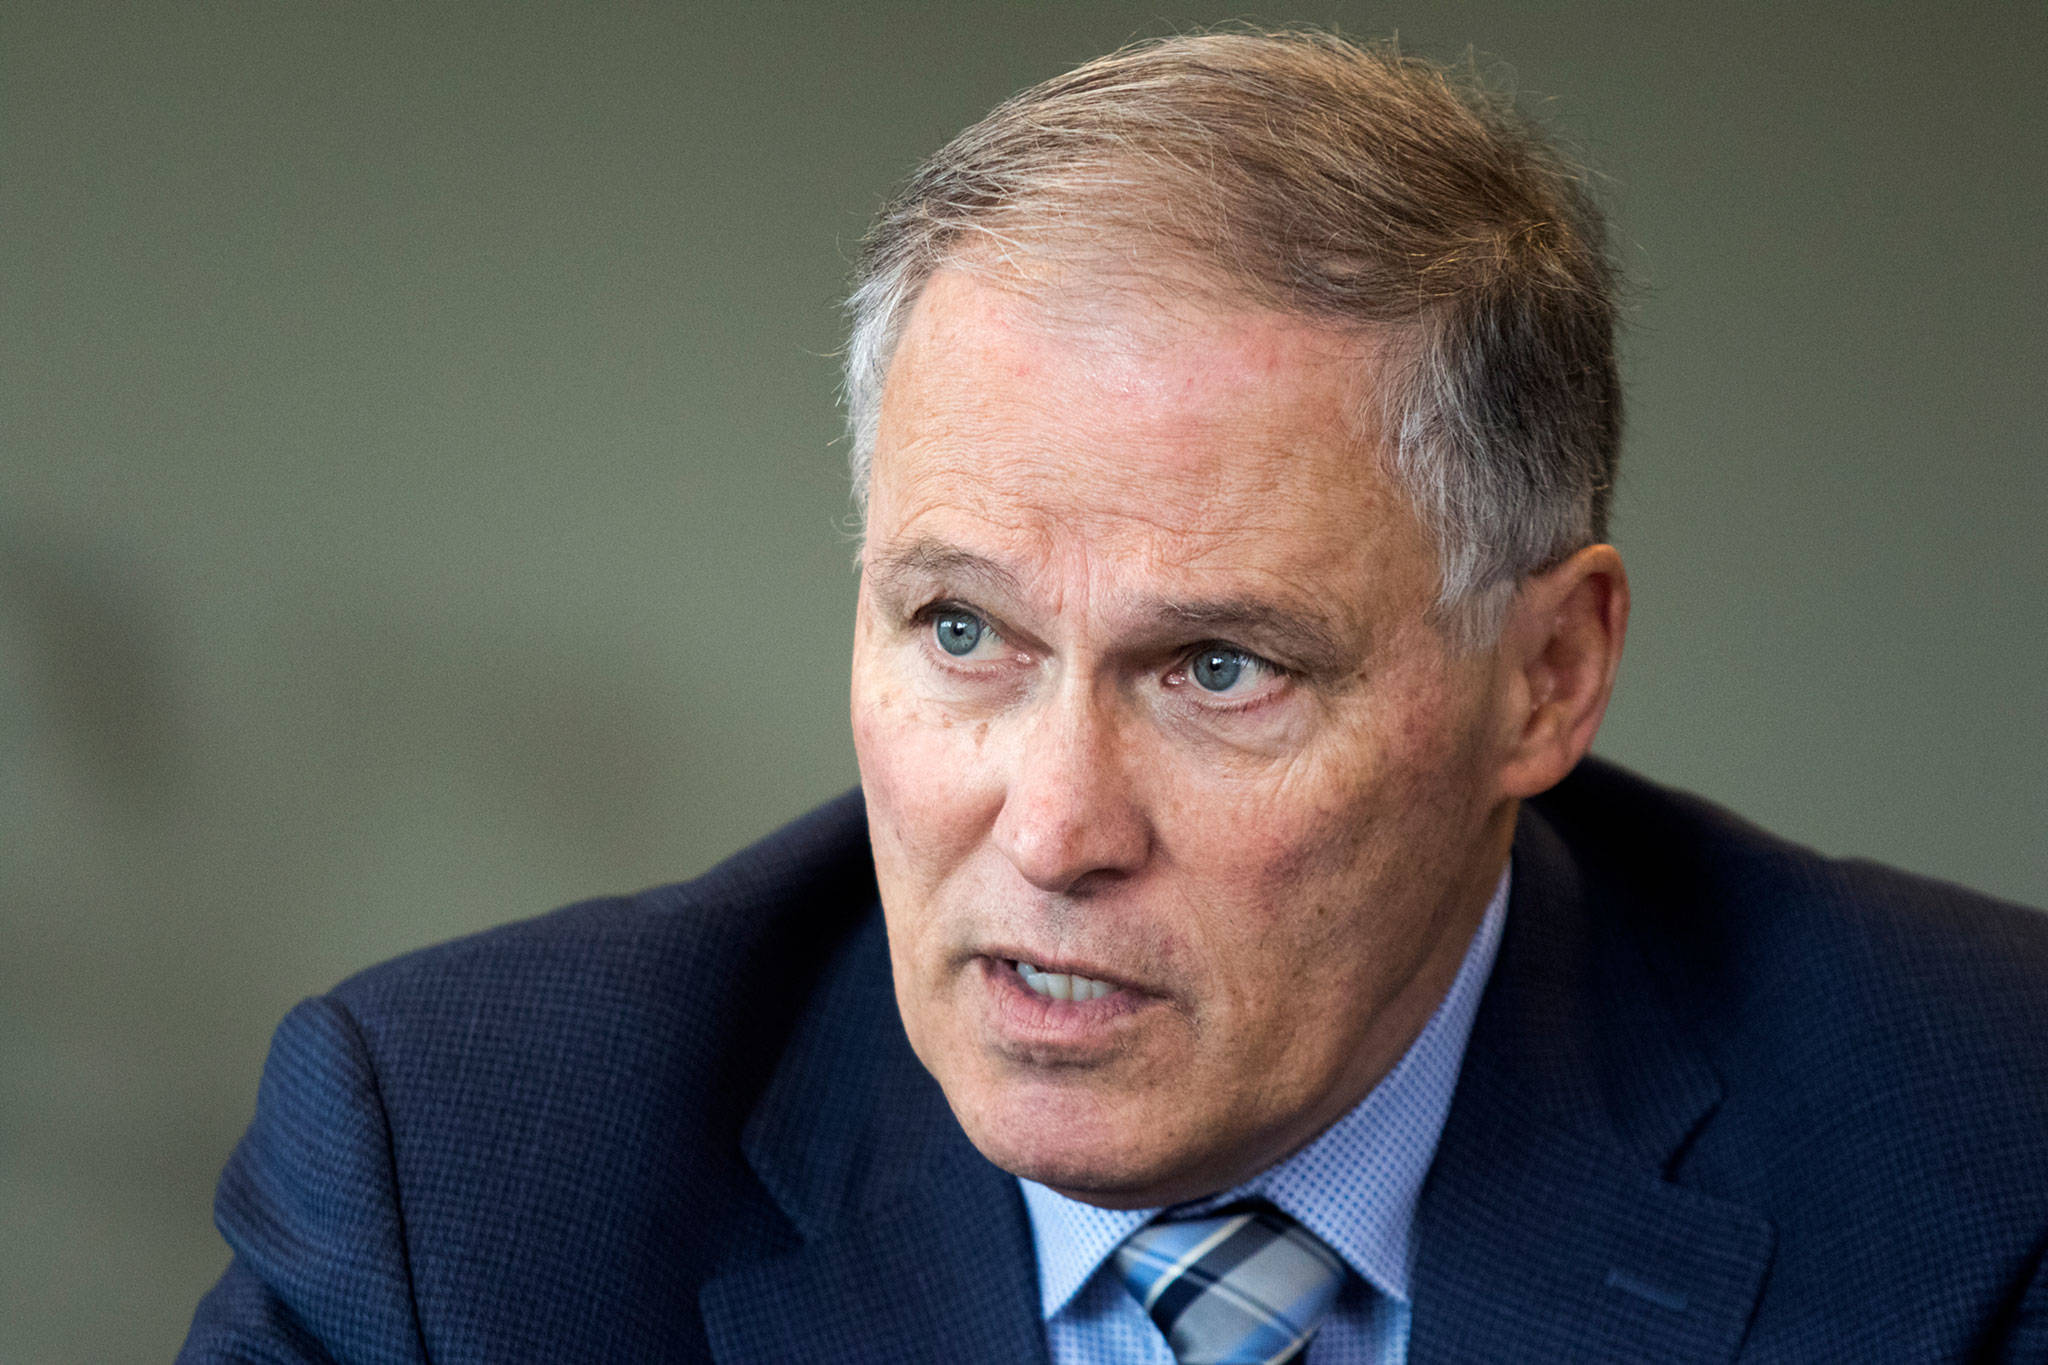 Washington Gov. Jay Inslee during a recent interview in Everett. (Andy Bronson / The Herald)